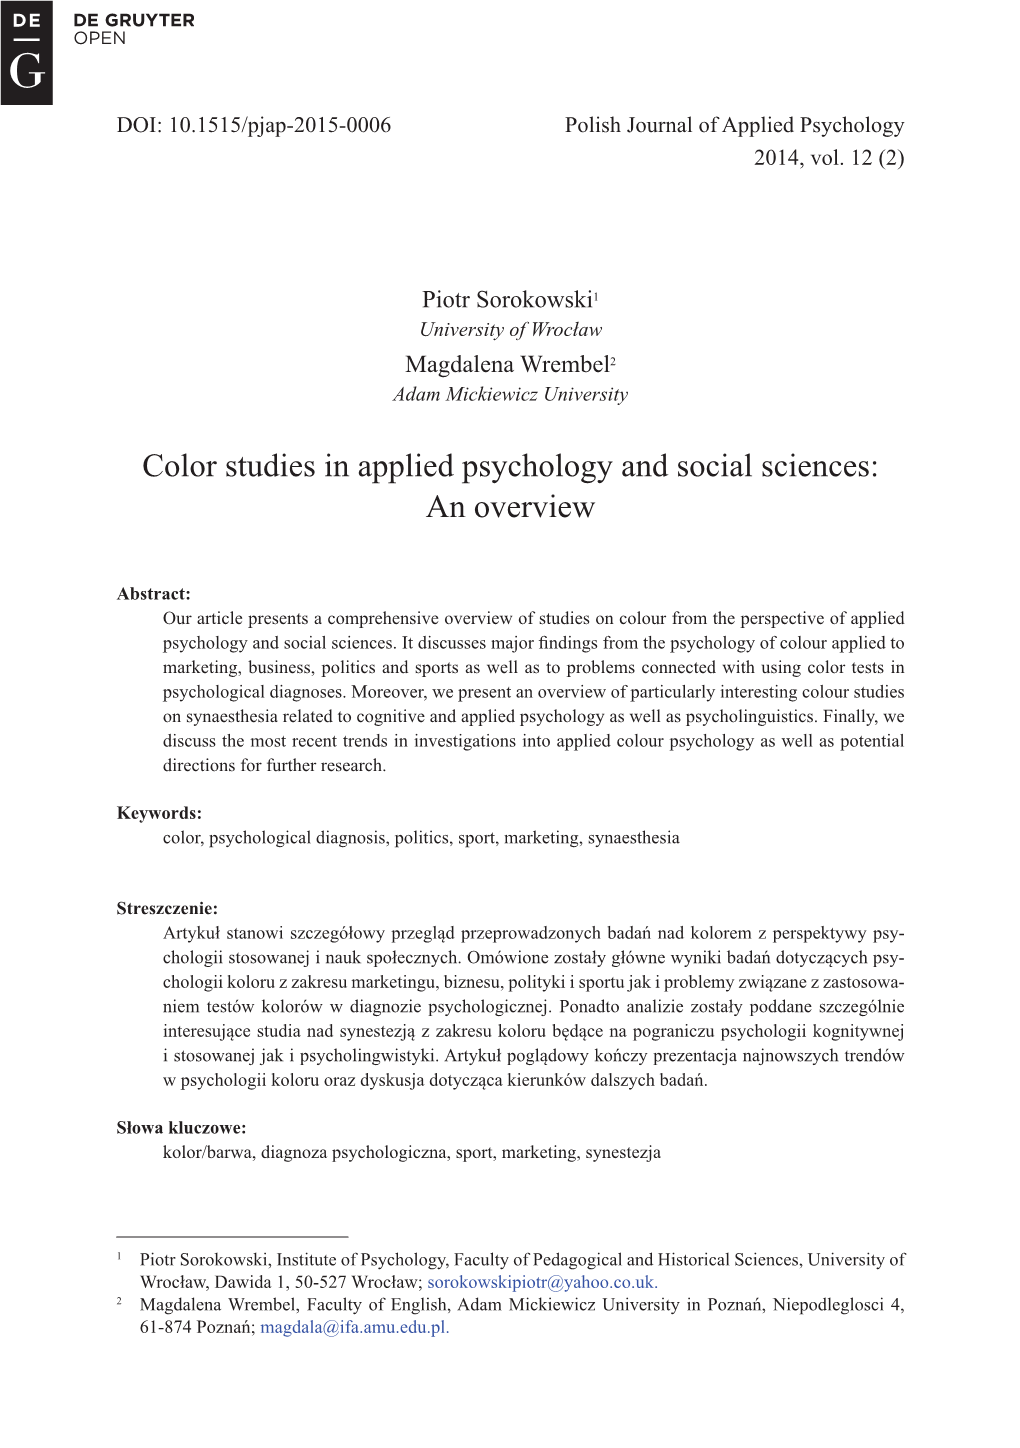 Color Studies in Applied Psychology and Social Sciences: an Overview